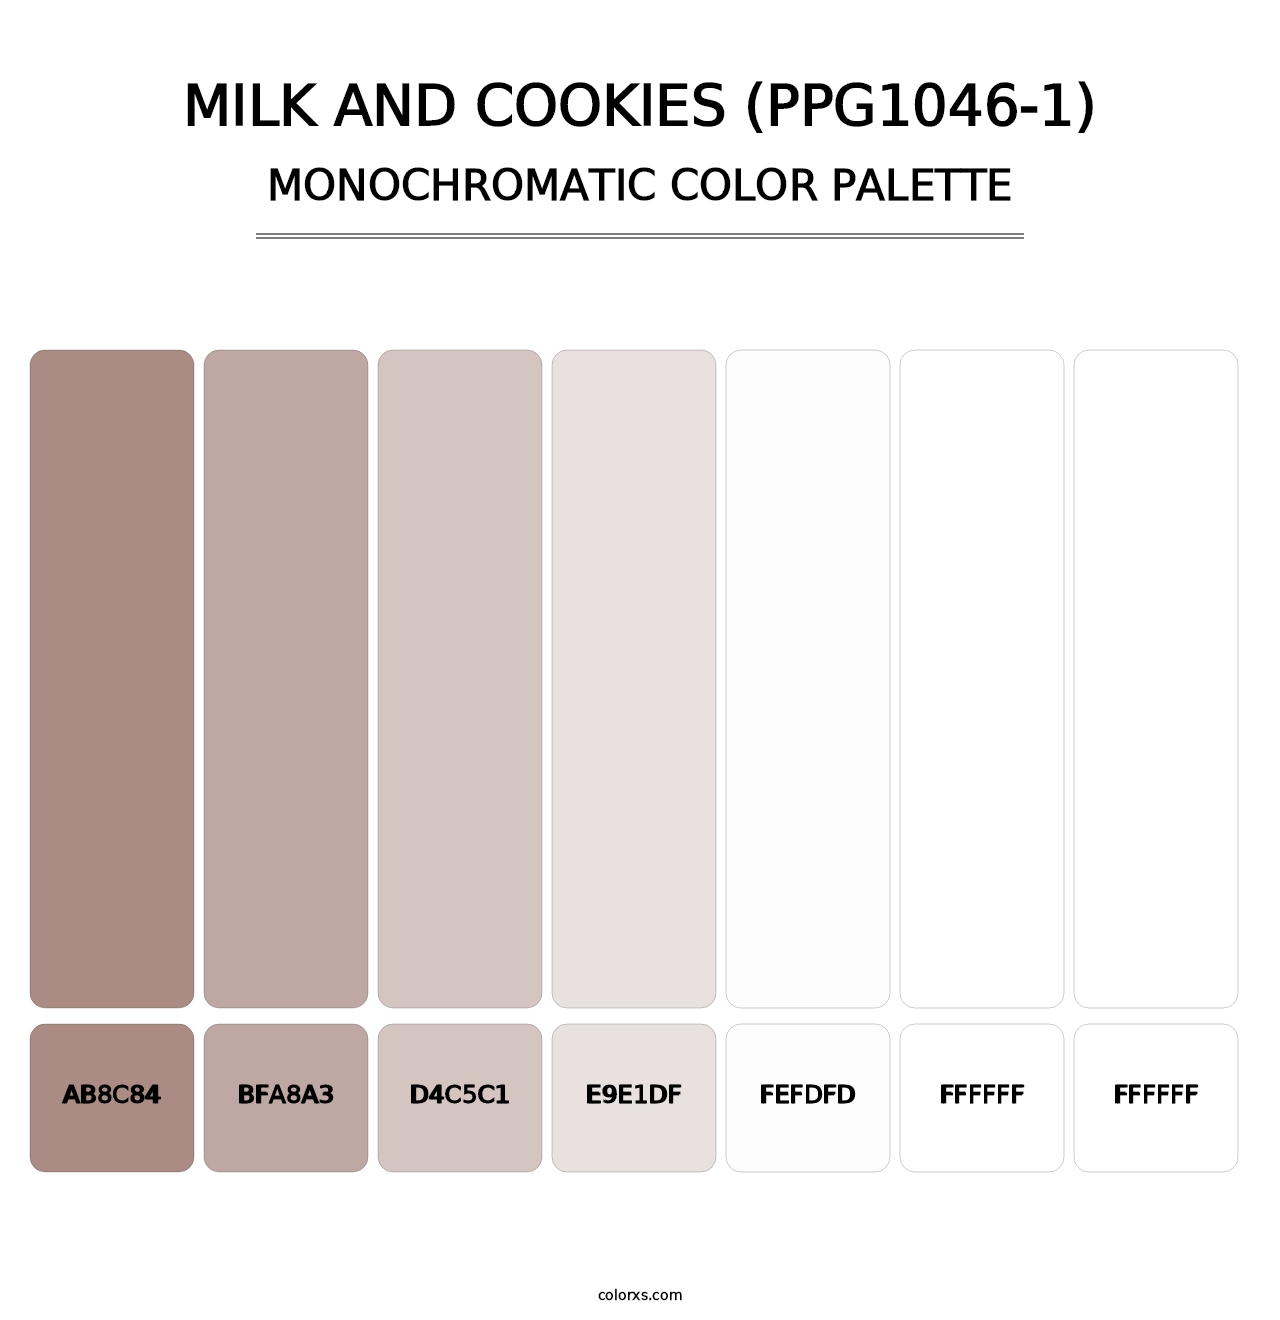 Milk And Cookies (PPG1046-1) - Monochromatic Color Palette